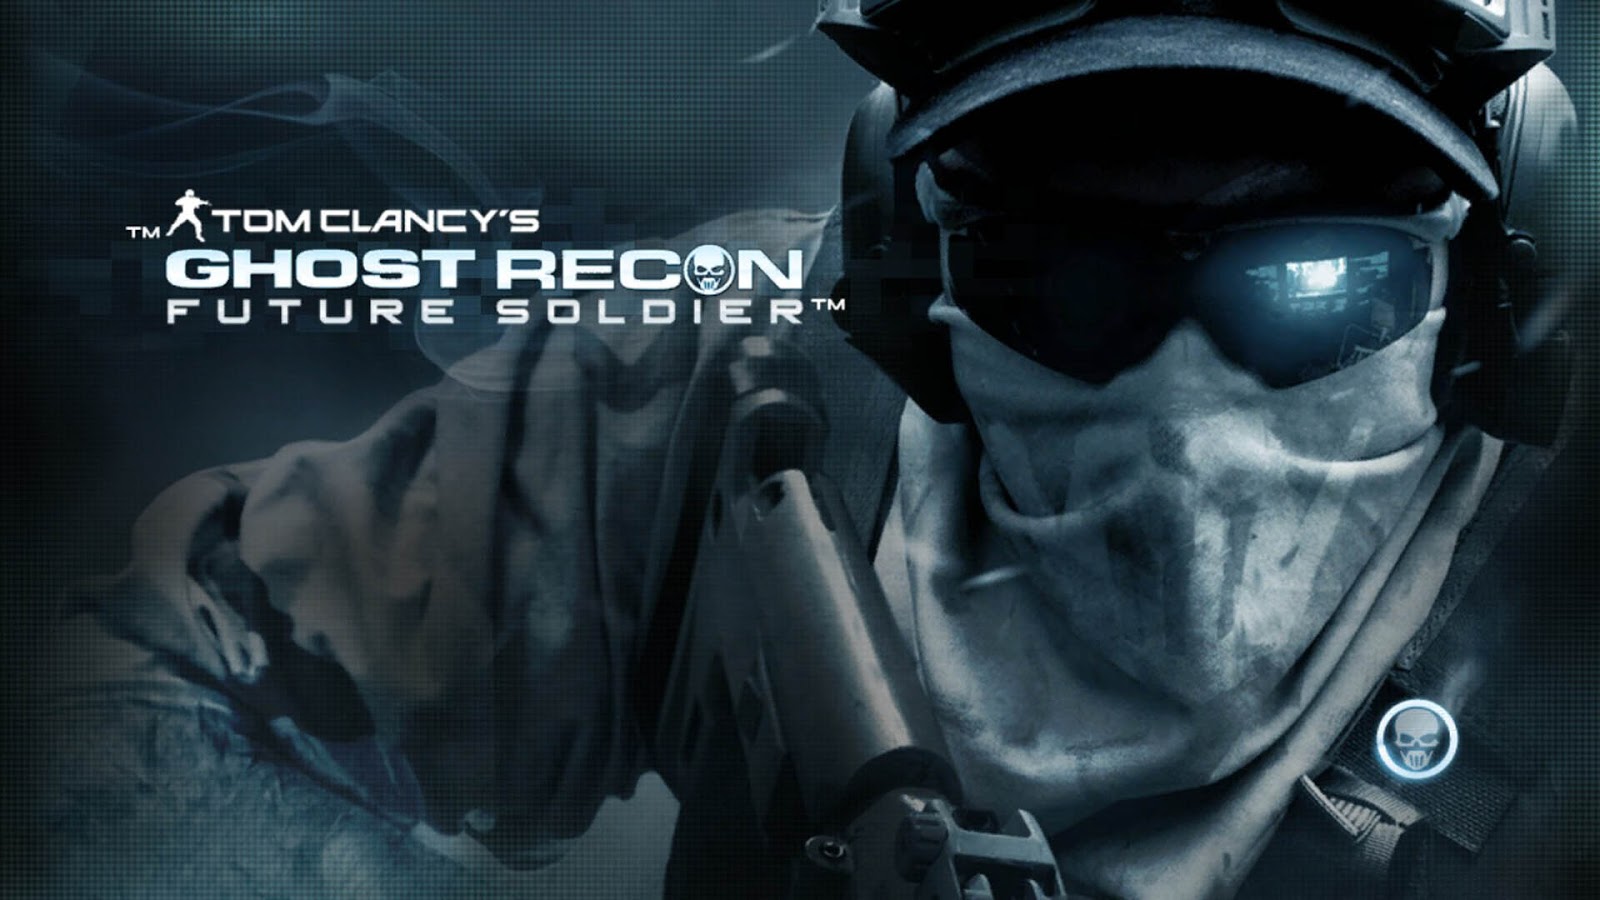 ghost recon future soldier wallpaper,action adventure game,games,cool,shooter game,eyewear